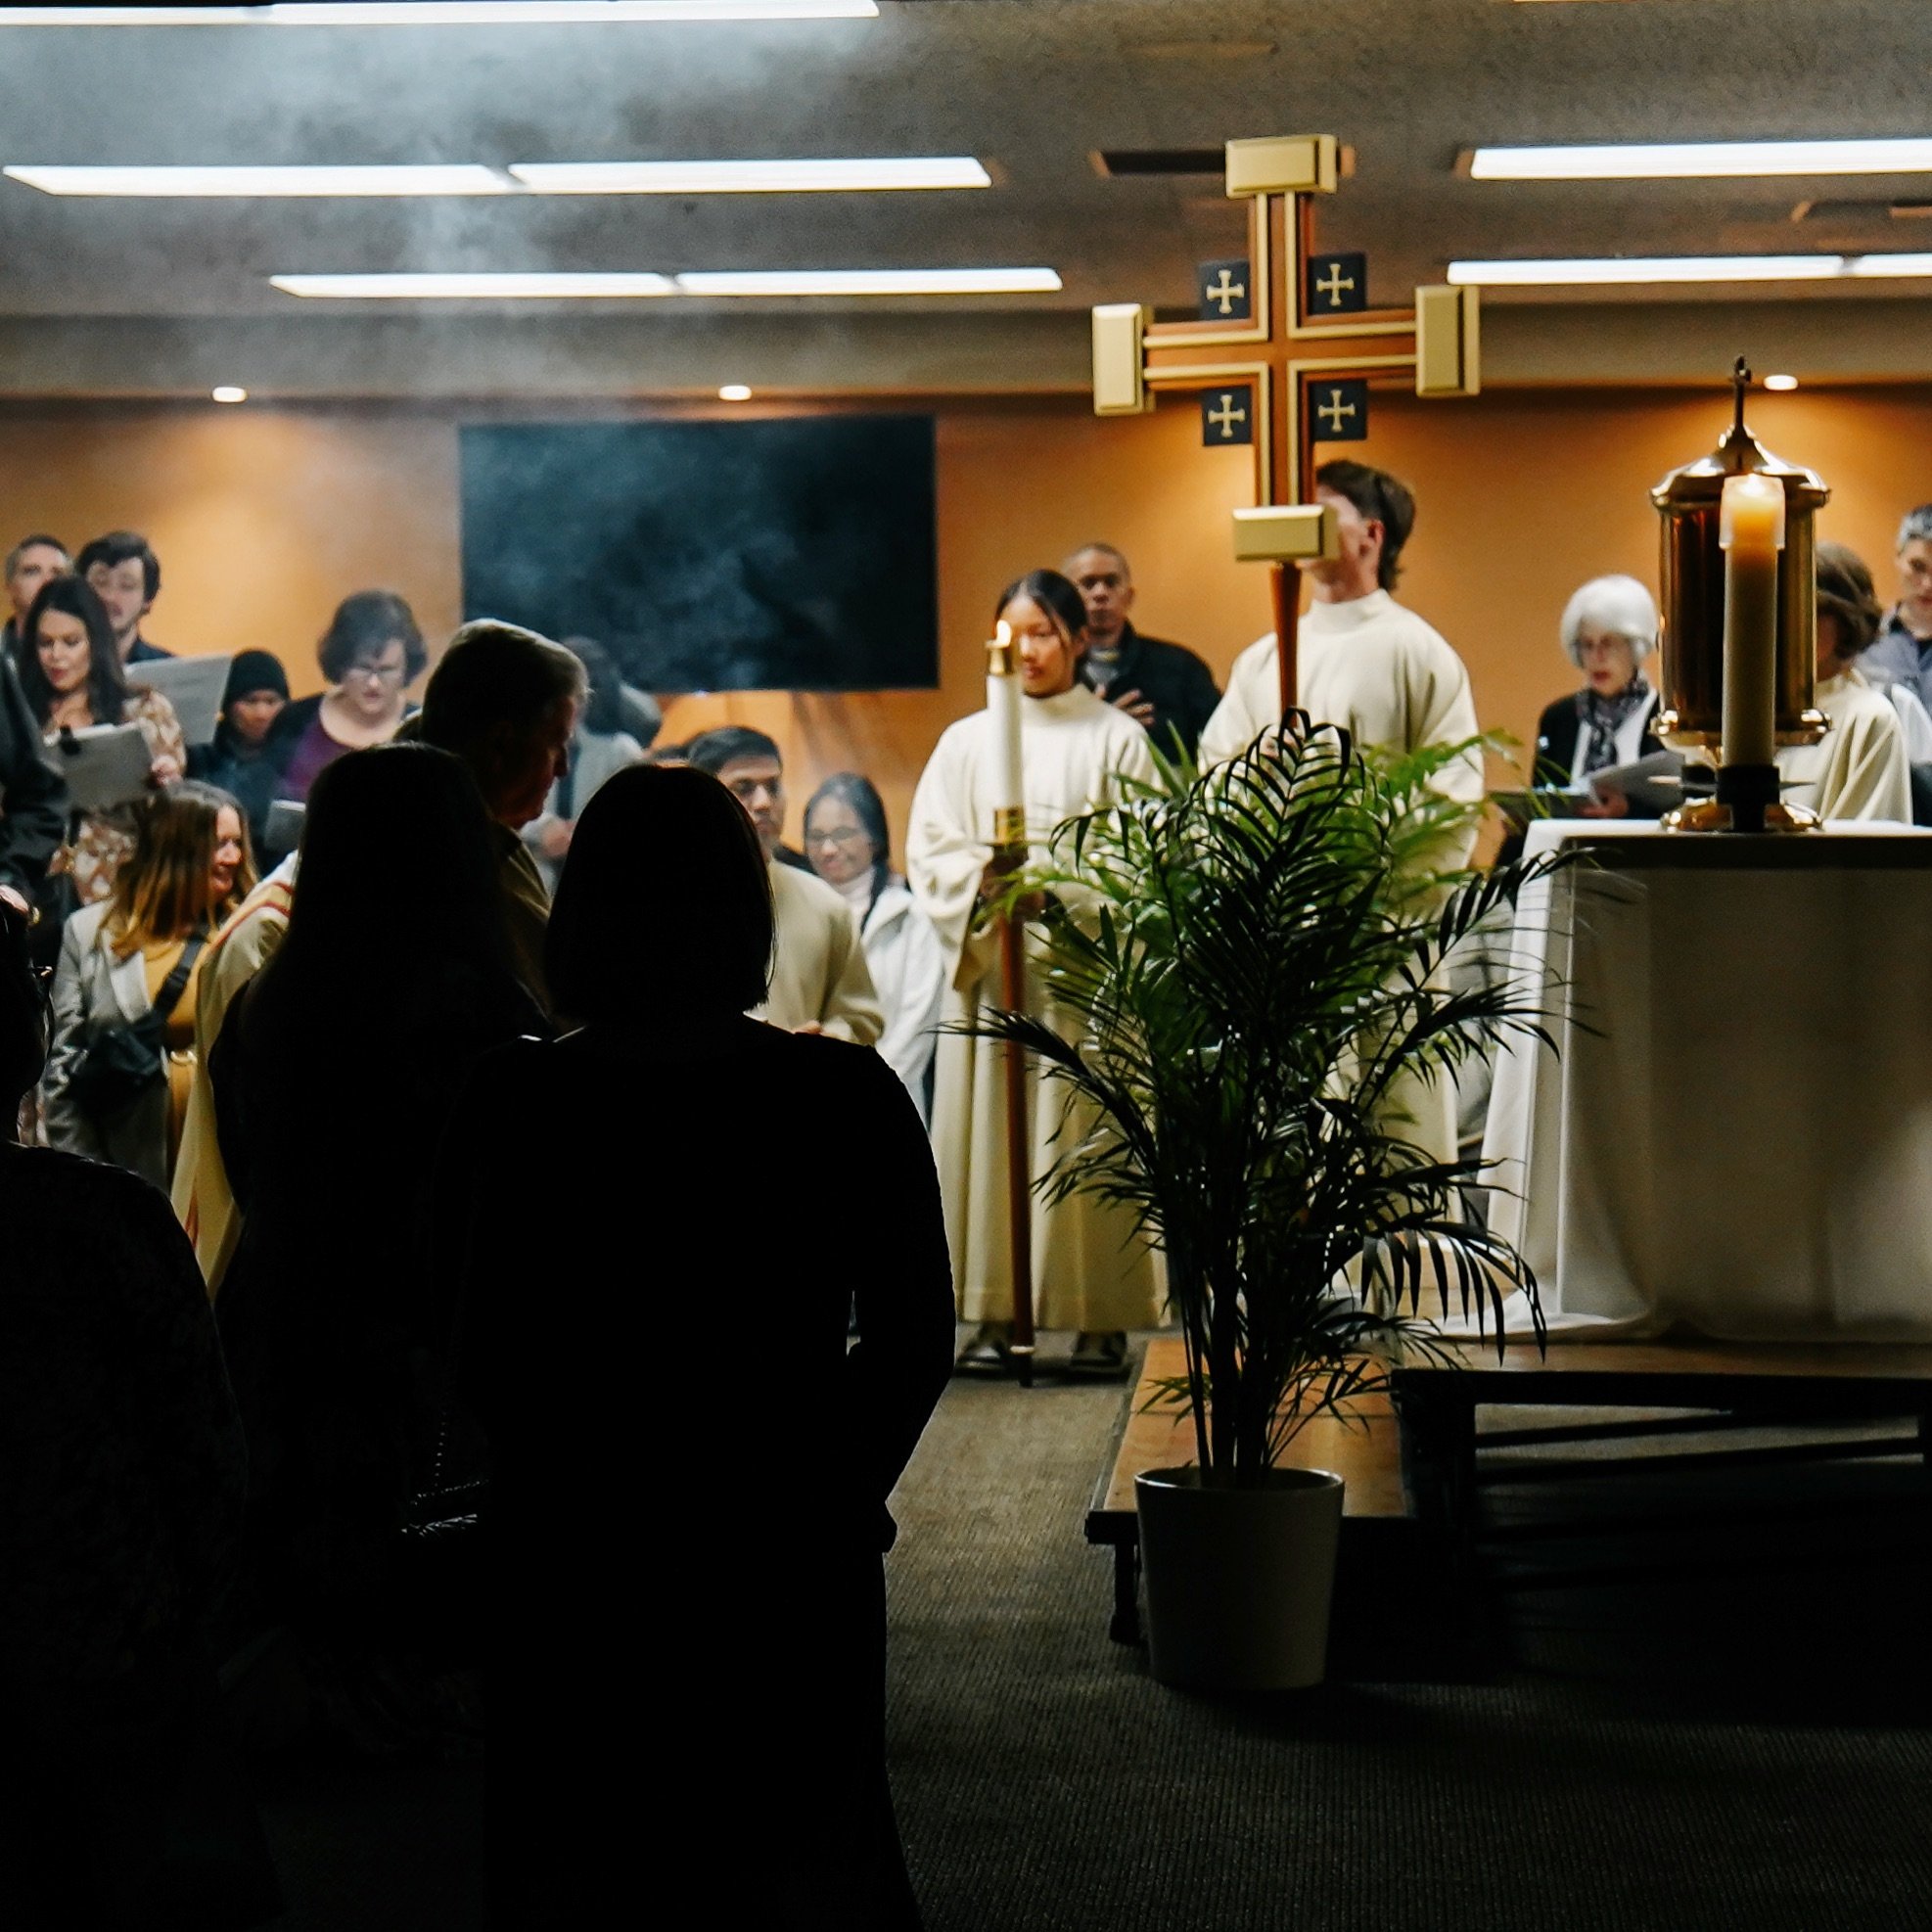 24-hour Adoration begins today! We will have 24-hour Adoration starting today, May 16th until Pentecost Sunday, May 19th at 5 pm in the Upper Room. 

We invite you to sign up for a Holy Hour to pray for an outpouring of the Holy Spirit, just as Mary 